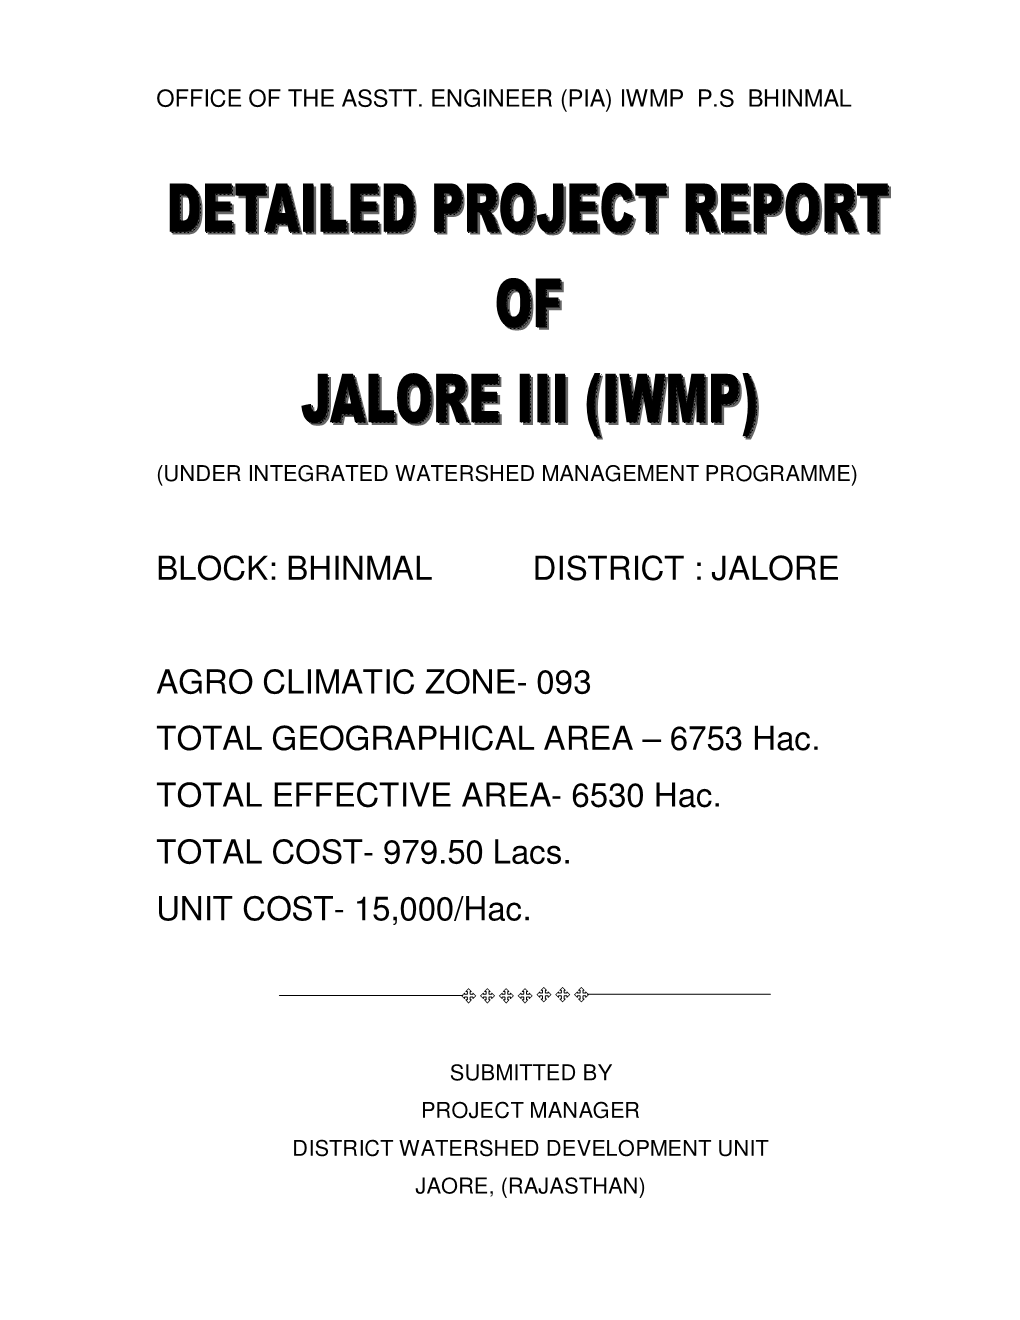 Block: Bhinmal District : Jalore Agro Climatic Zone